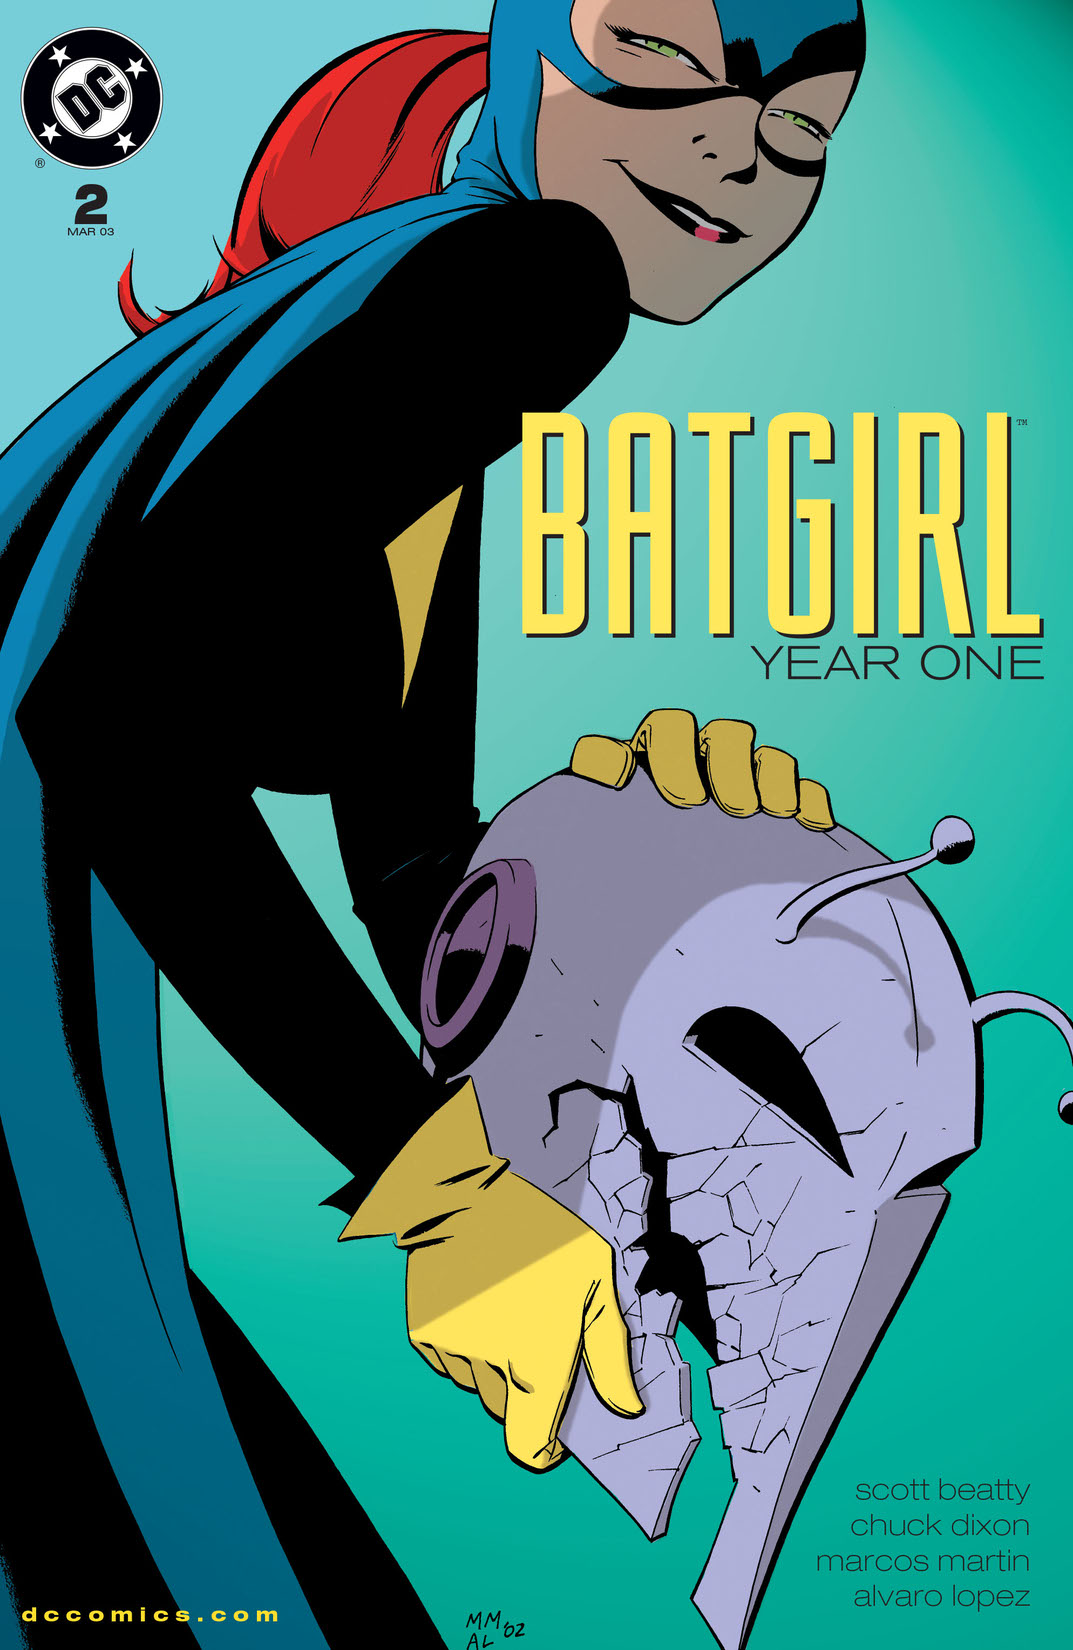 Batgirl Year One #2 preview images